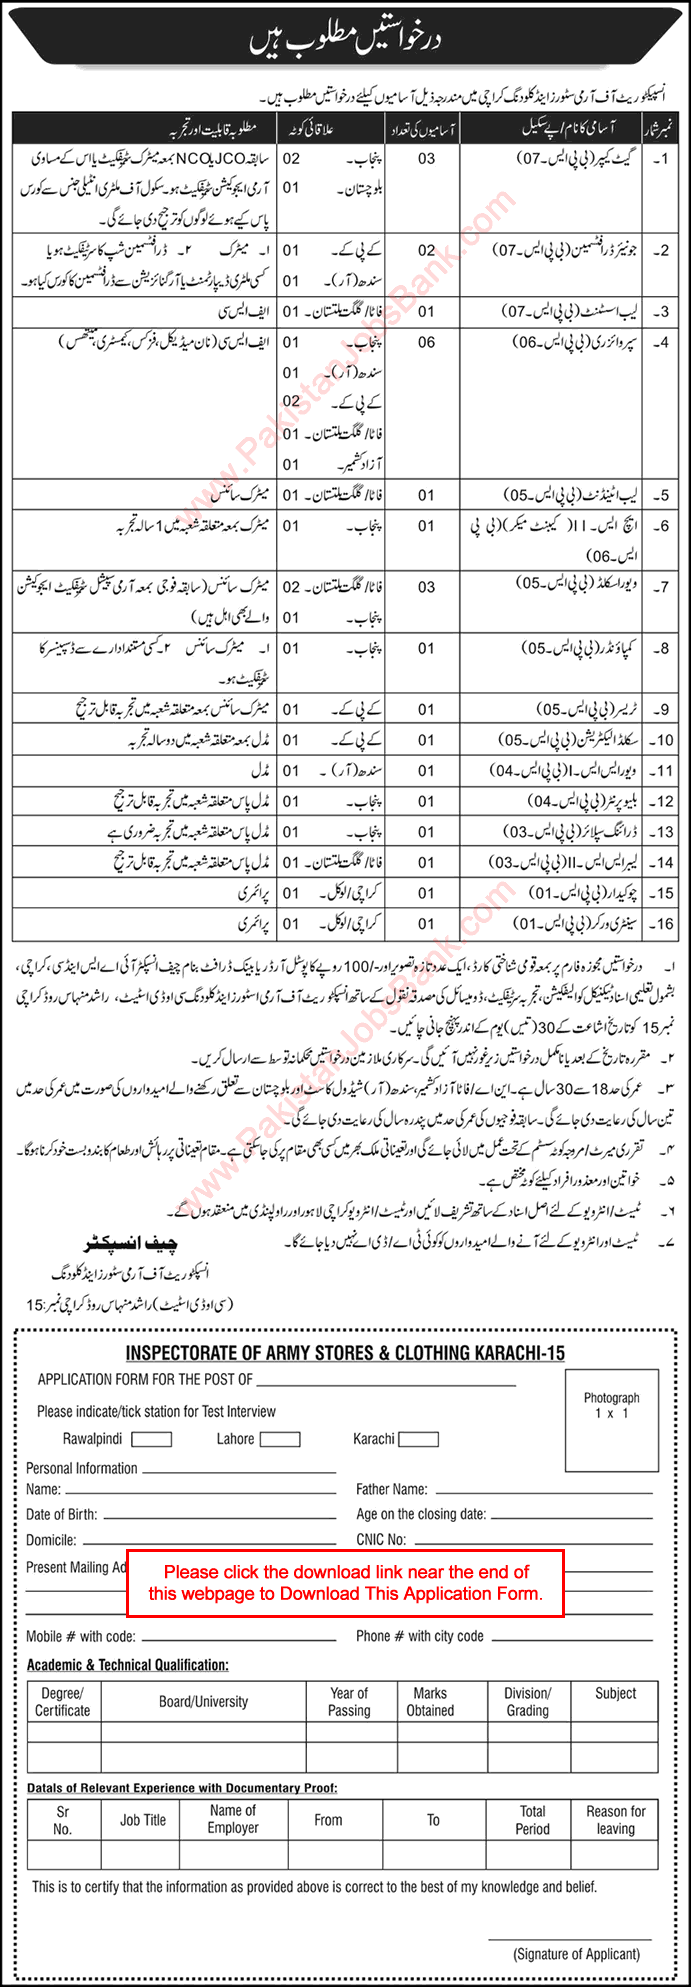 Inspectorate of Army Stores and Clothing Karachi Jobs 2017 February Application Form Download Latest